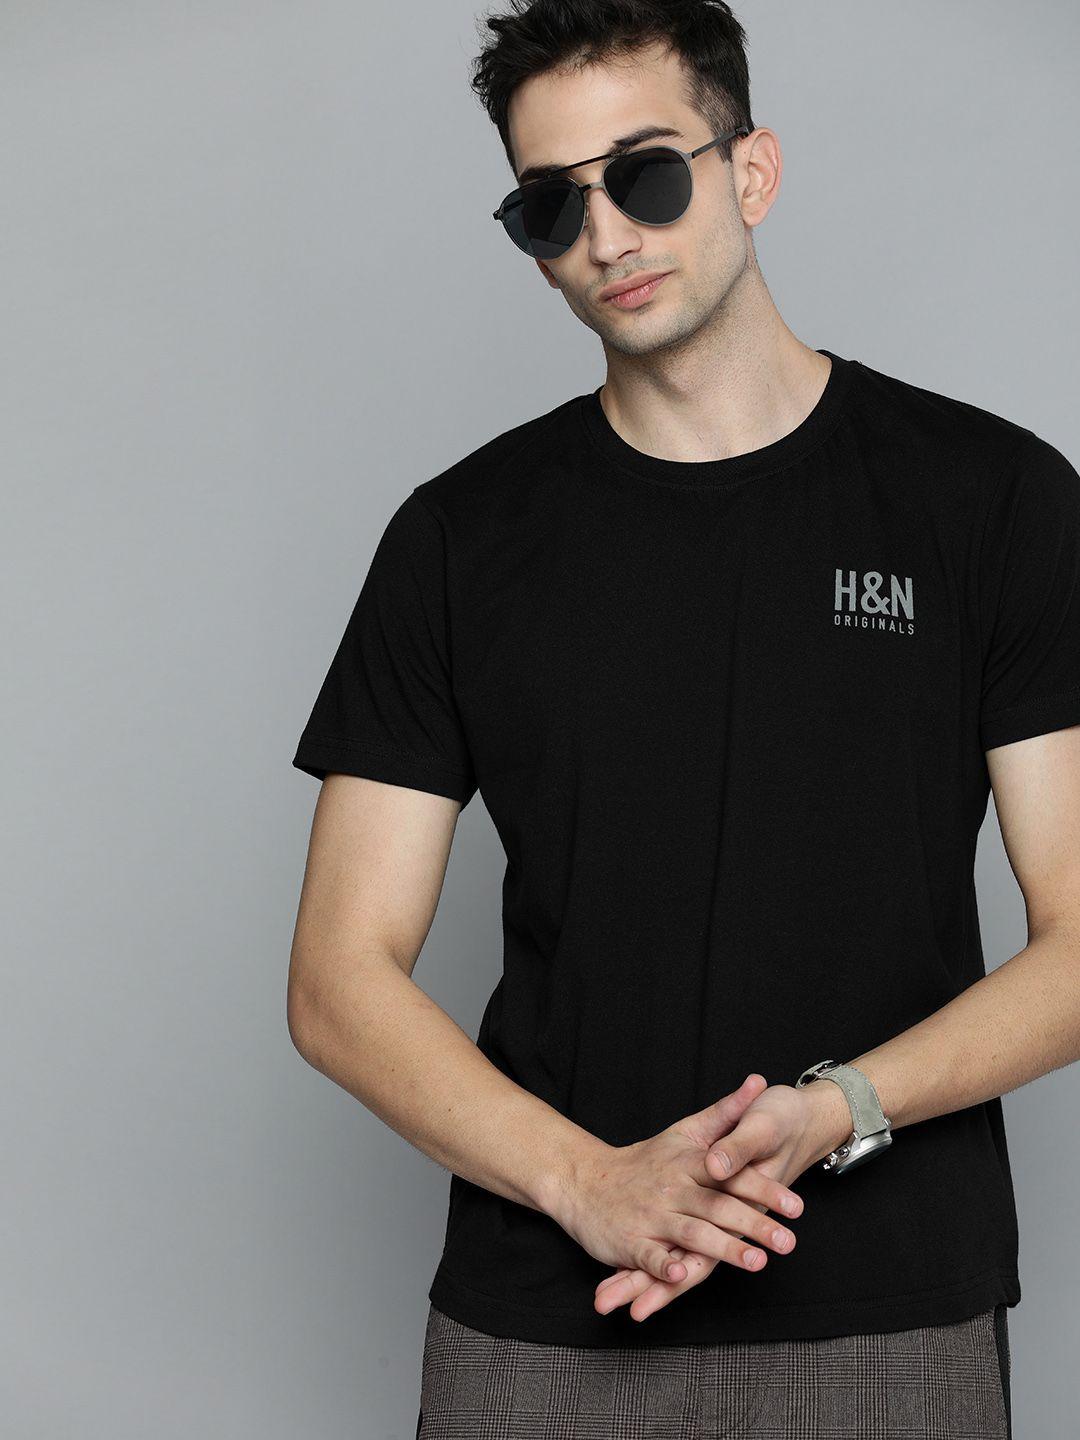 here&now men black solid round neck t-shirt with print detail